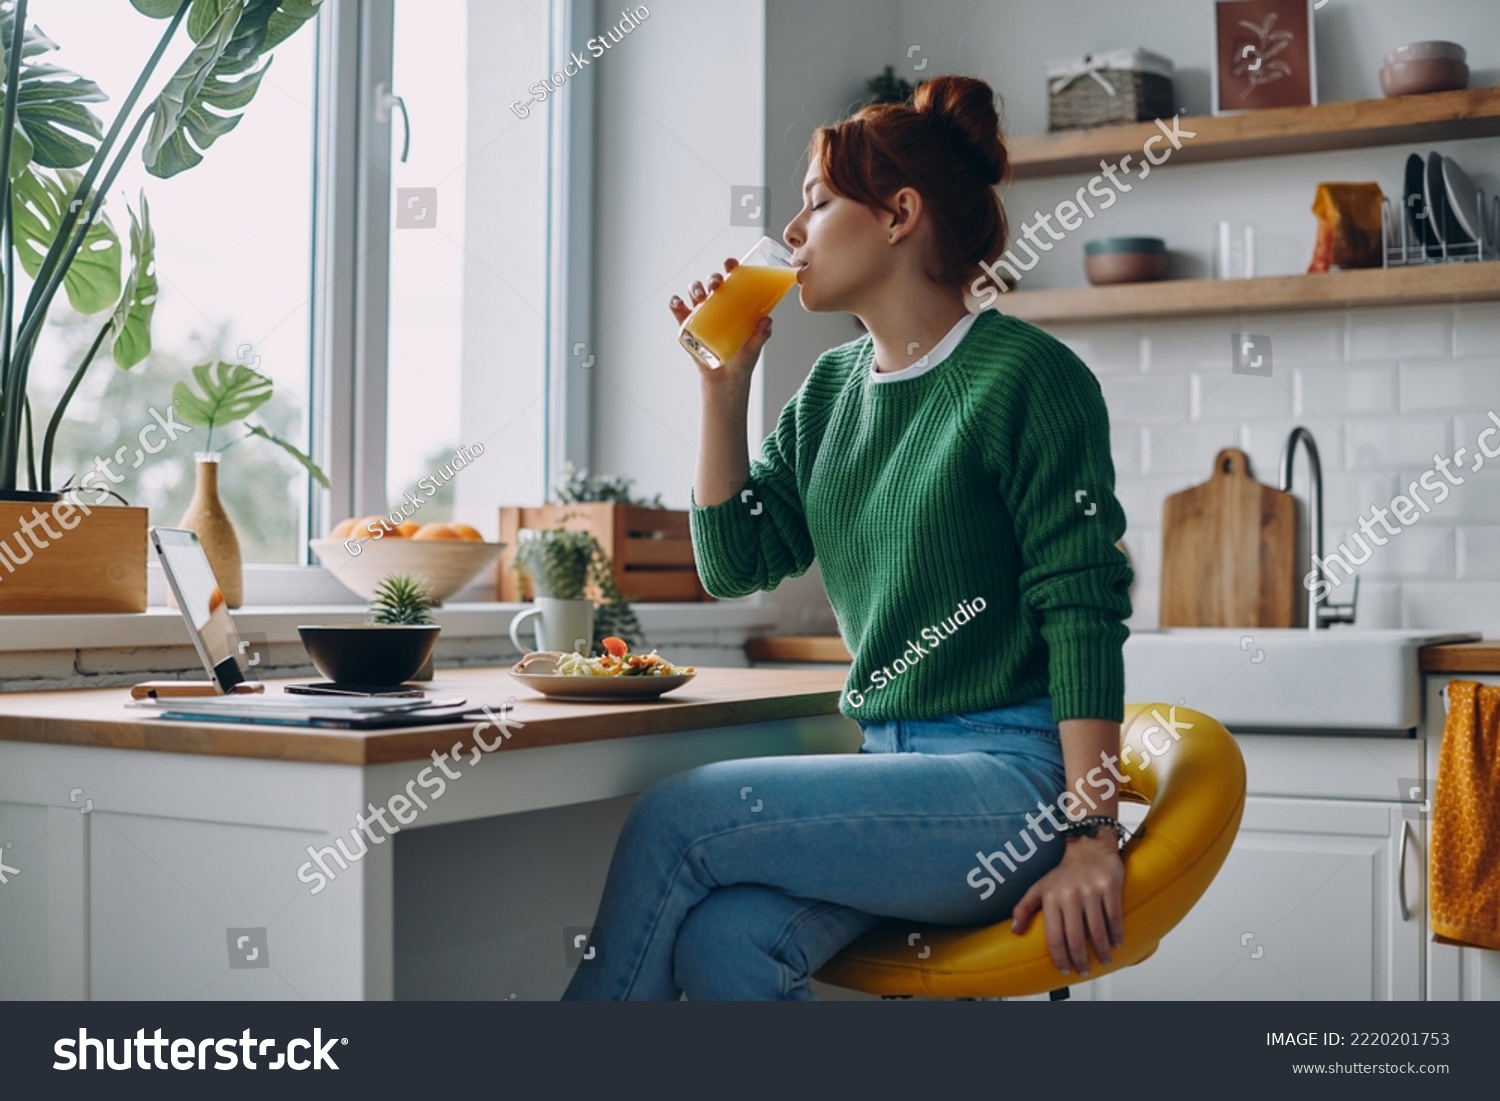 Beautiful redhead woman drinking juice while having lunch at the domestic kitchen #2220201753